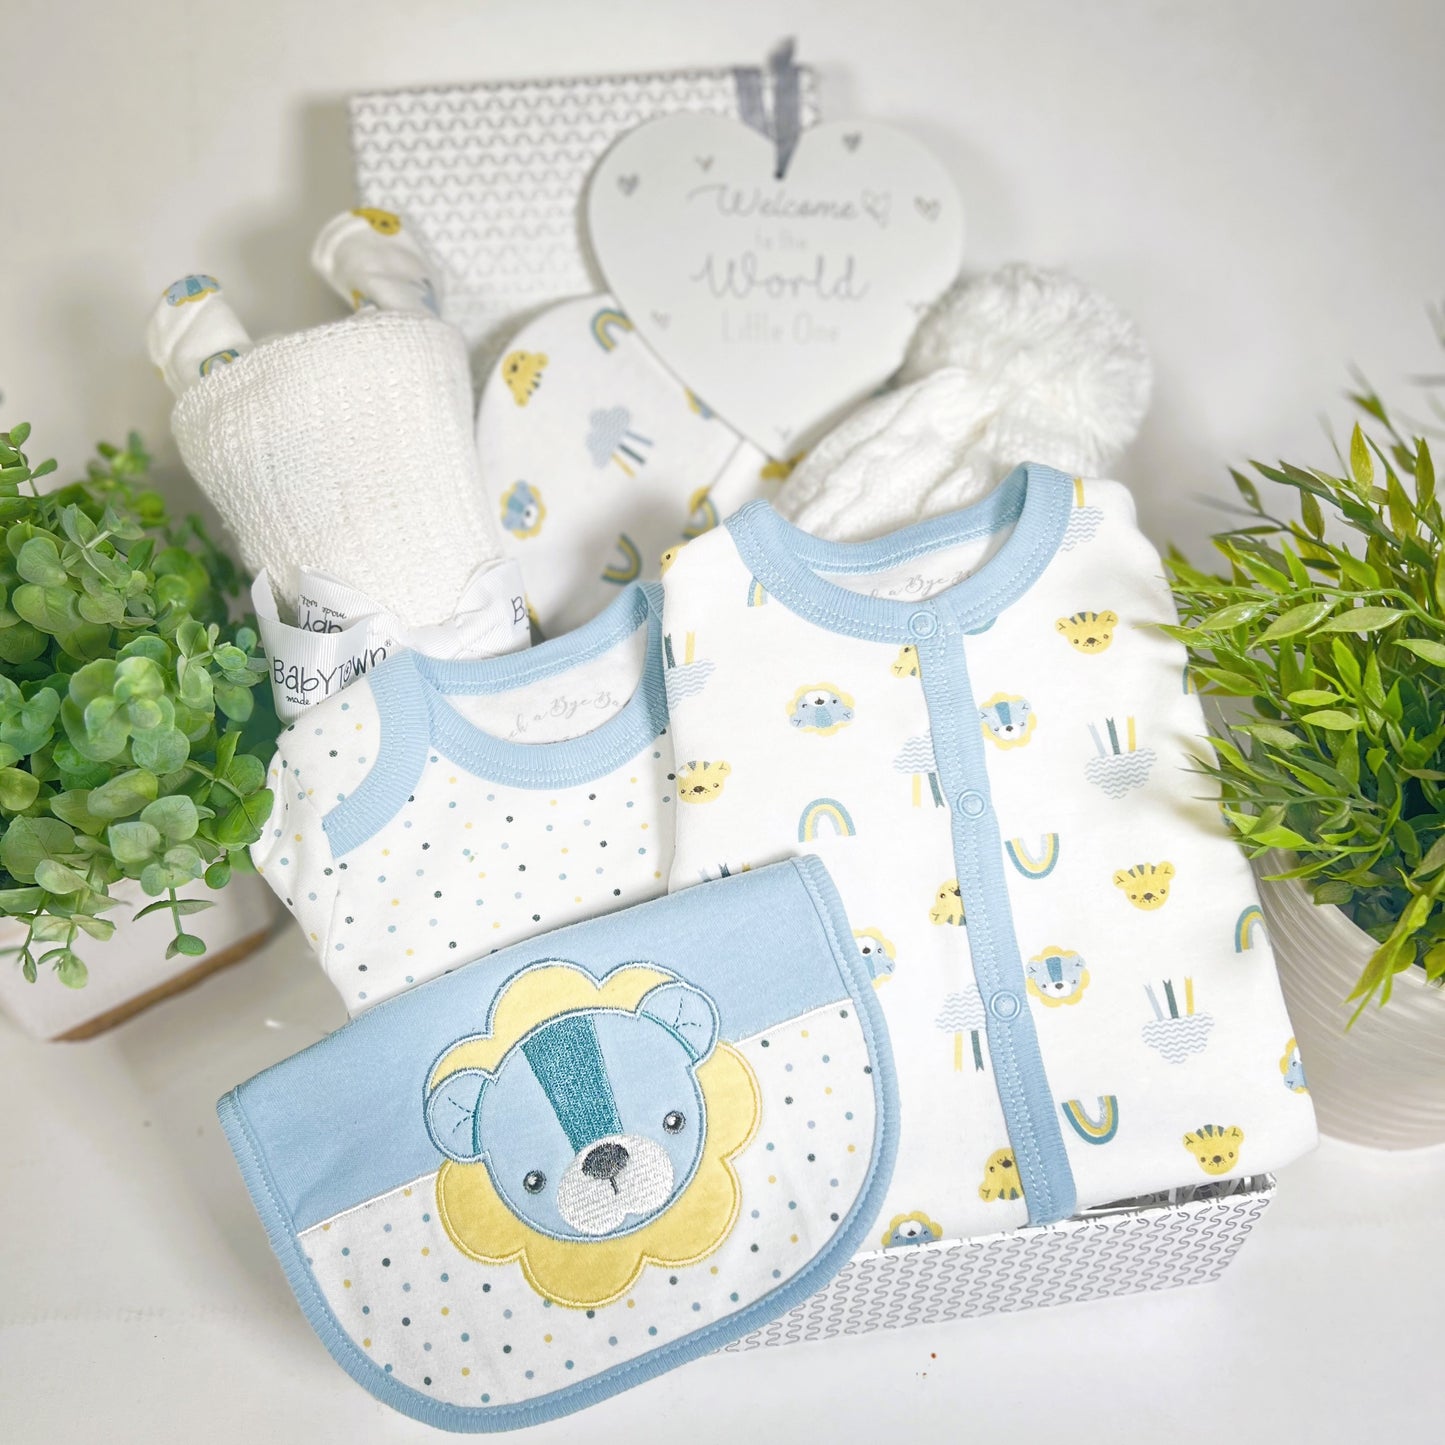 Newborn Baby Boy Gift Set Lion Themed, Cotton Layette Set, Baby Pompom Hat, White Cellular Baby Blanket, Baby Shower Gifts For Boys